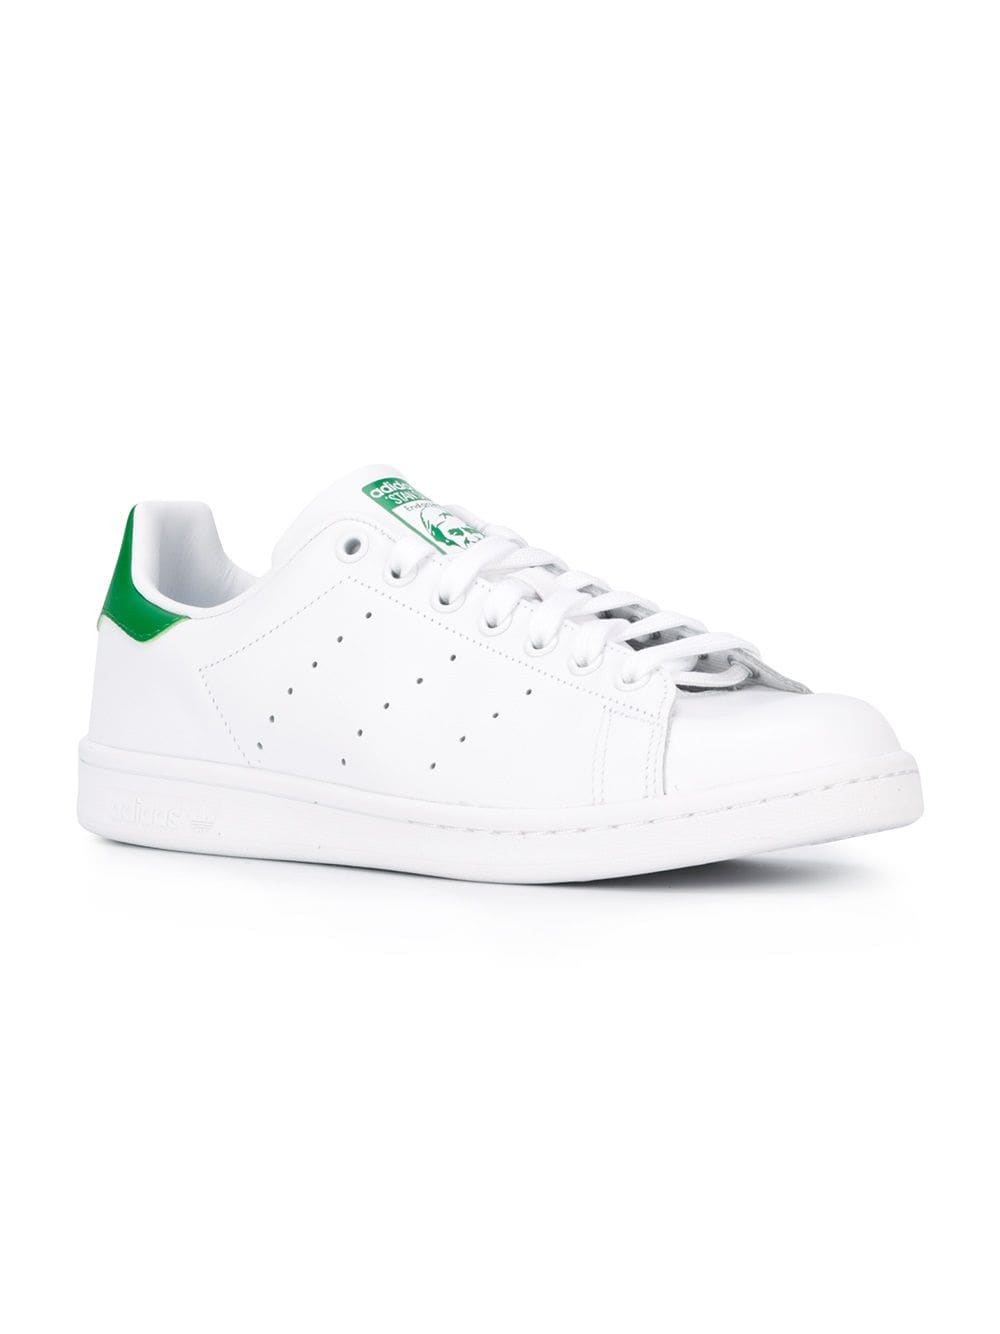 Image 2 of adidas Stan Smith "OG White/Green" sneakers